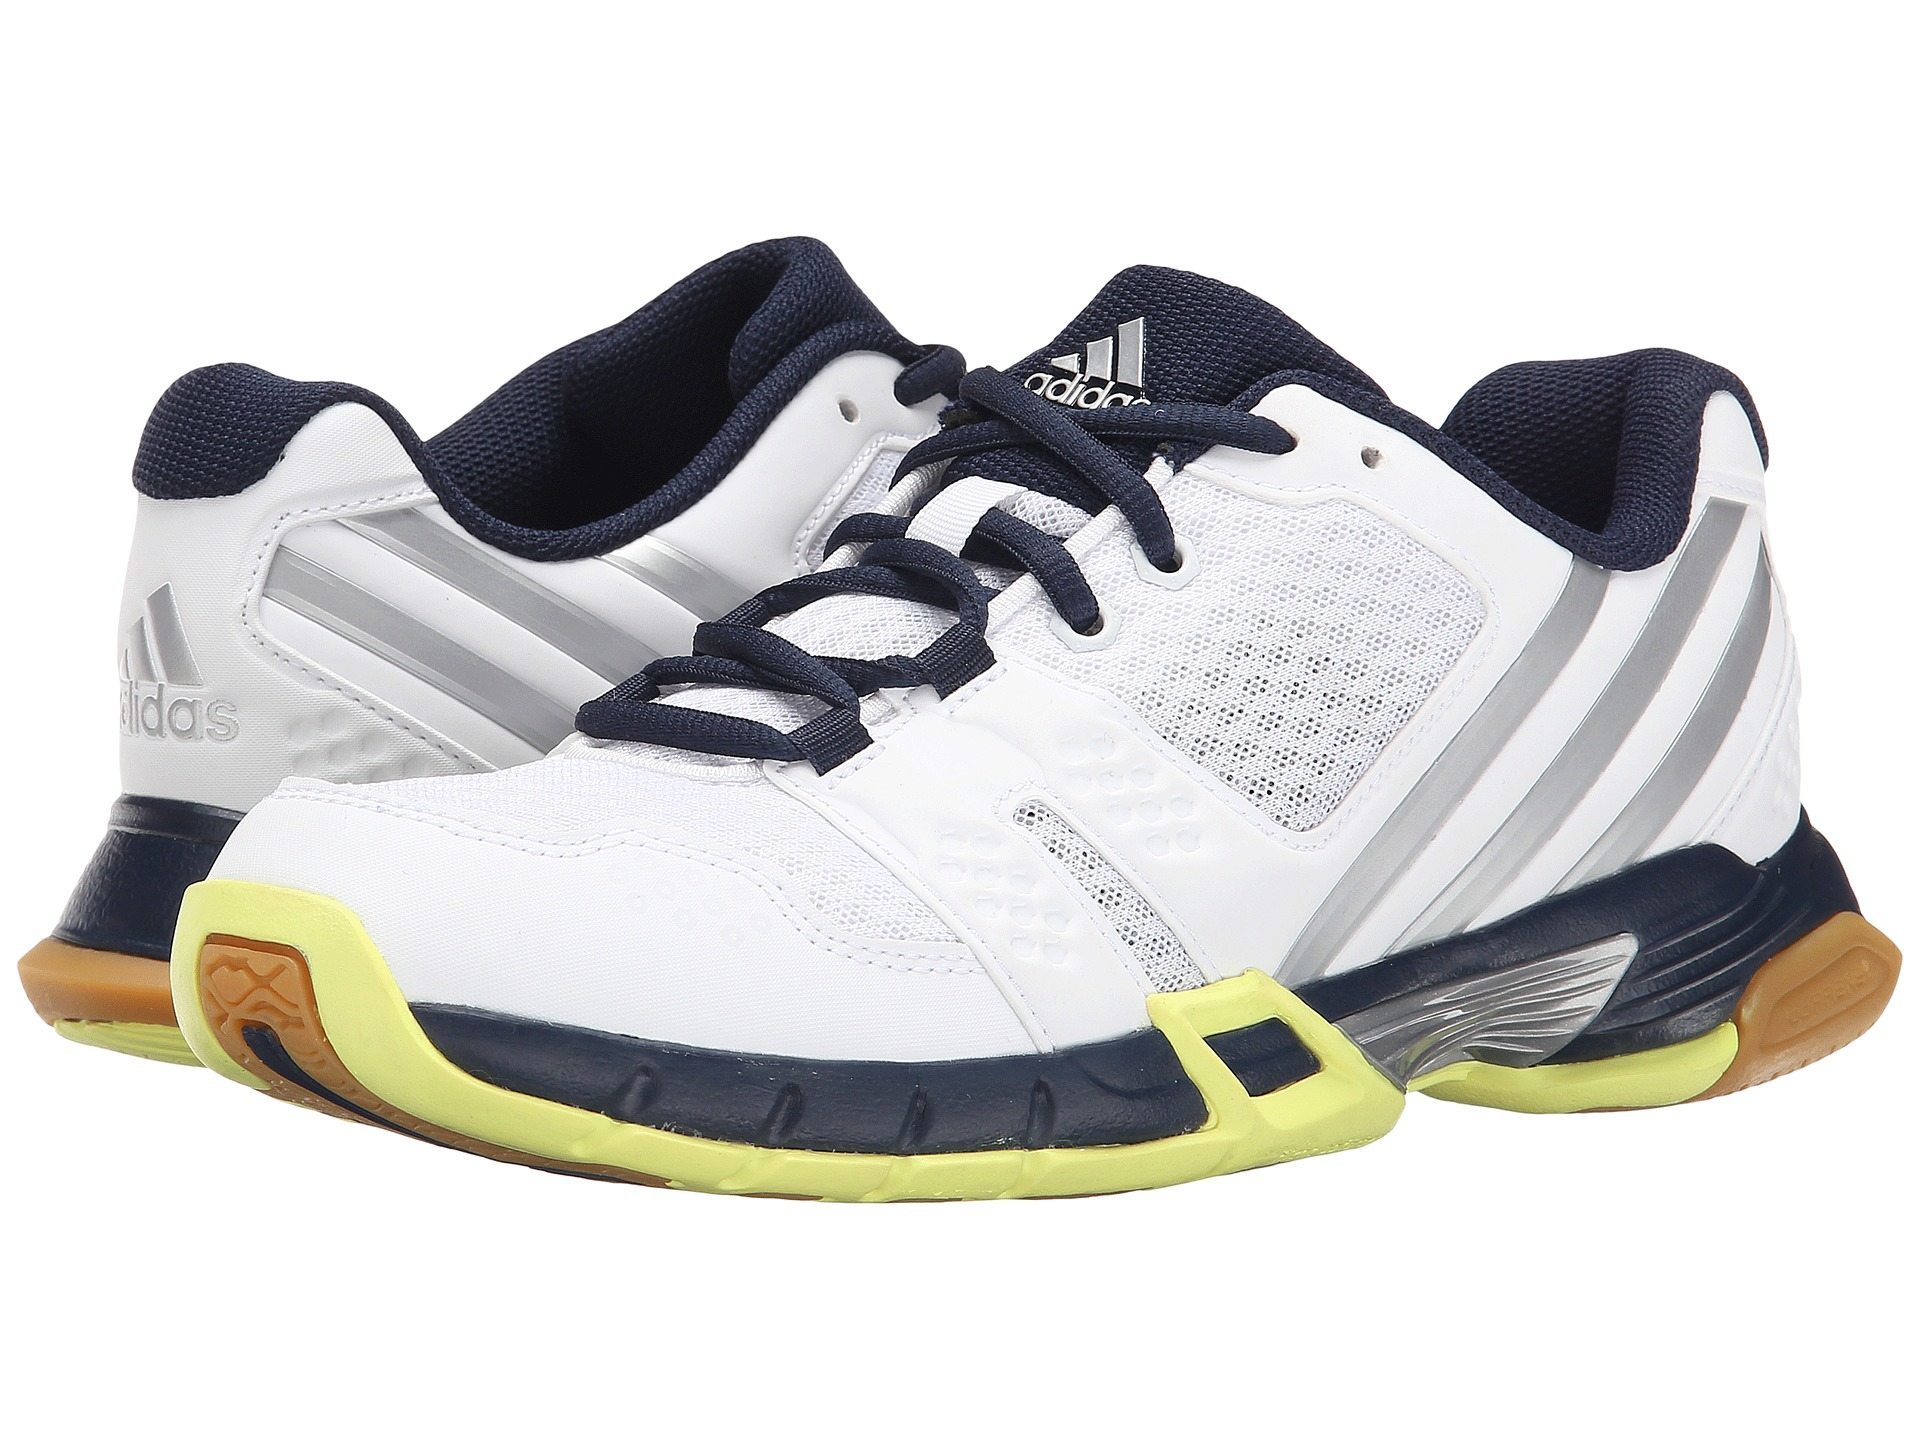 Adidas Volley Team 3 Court Shoes - Squash Source